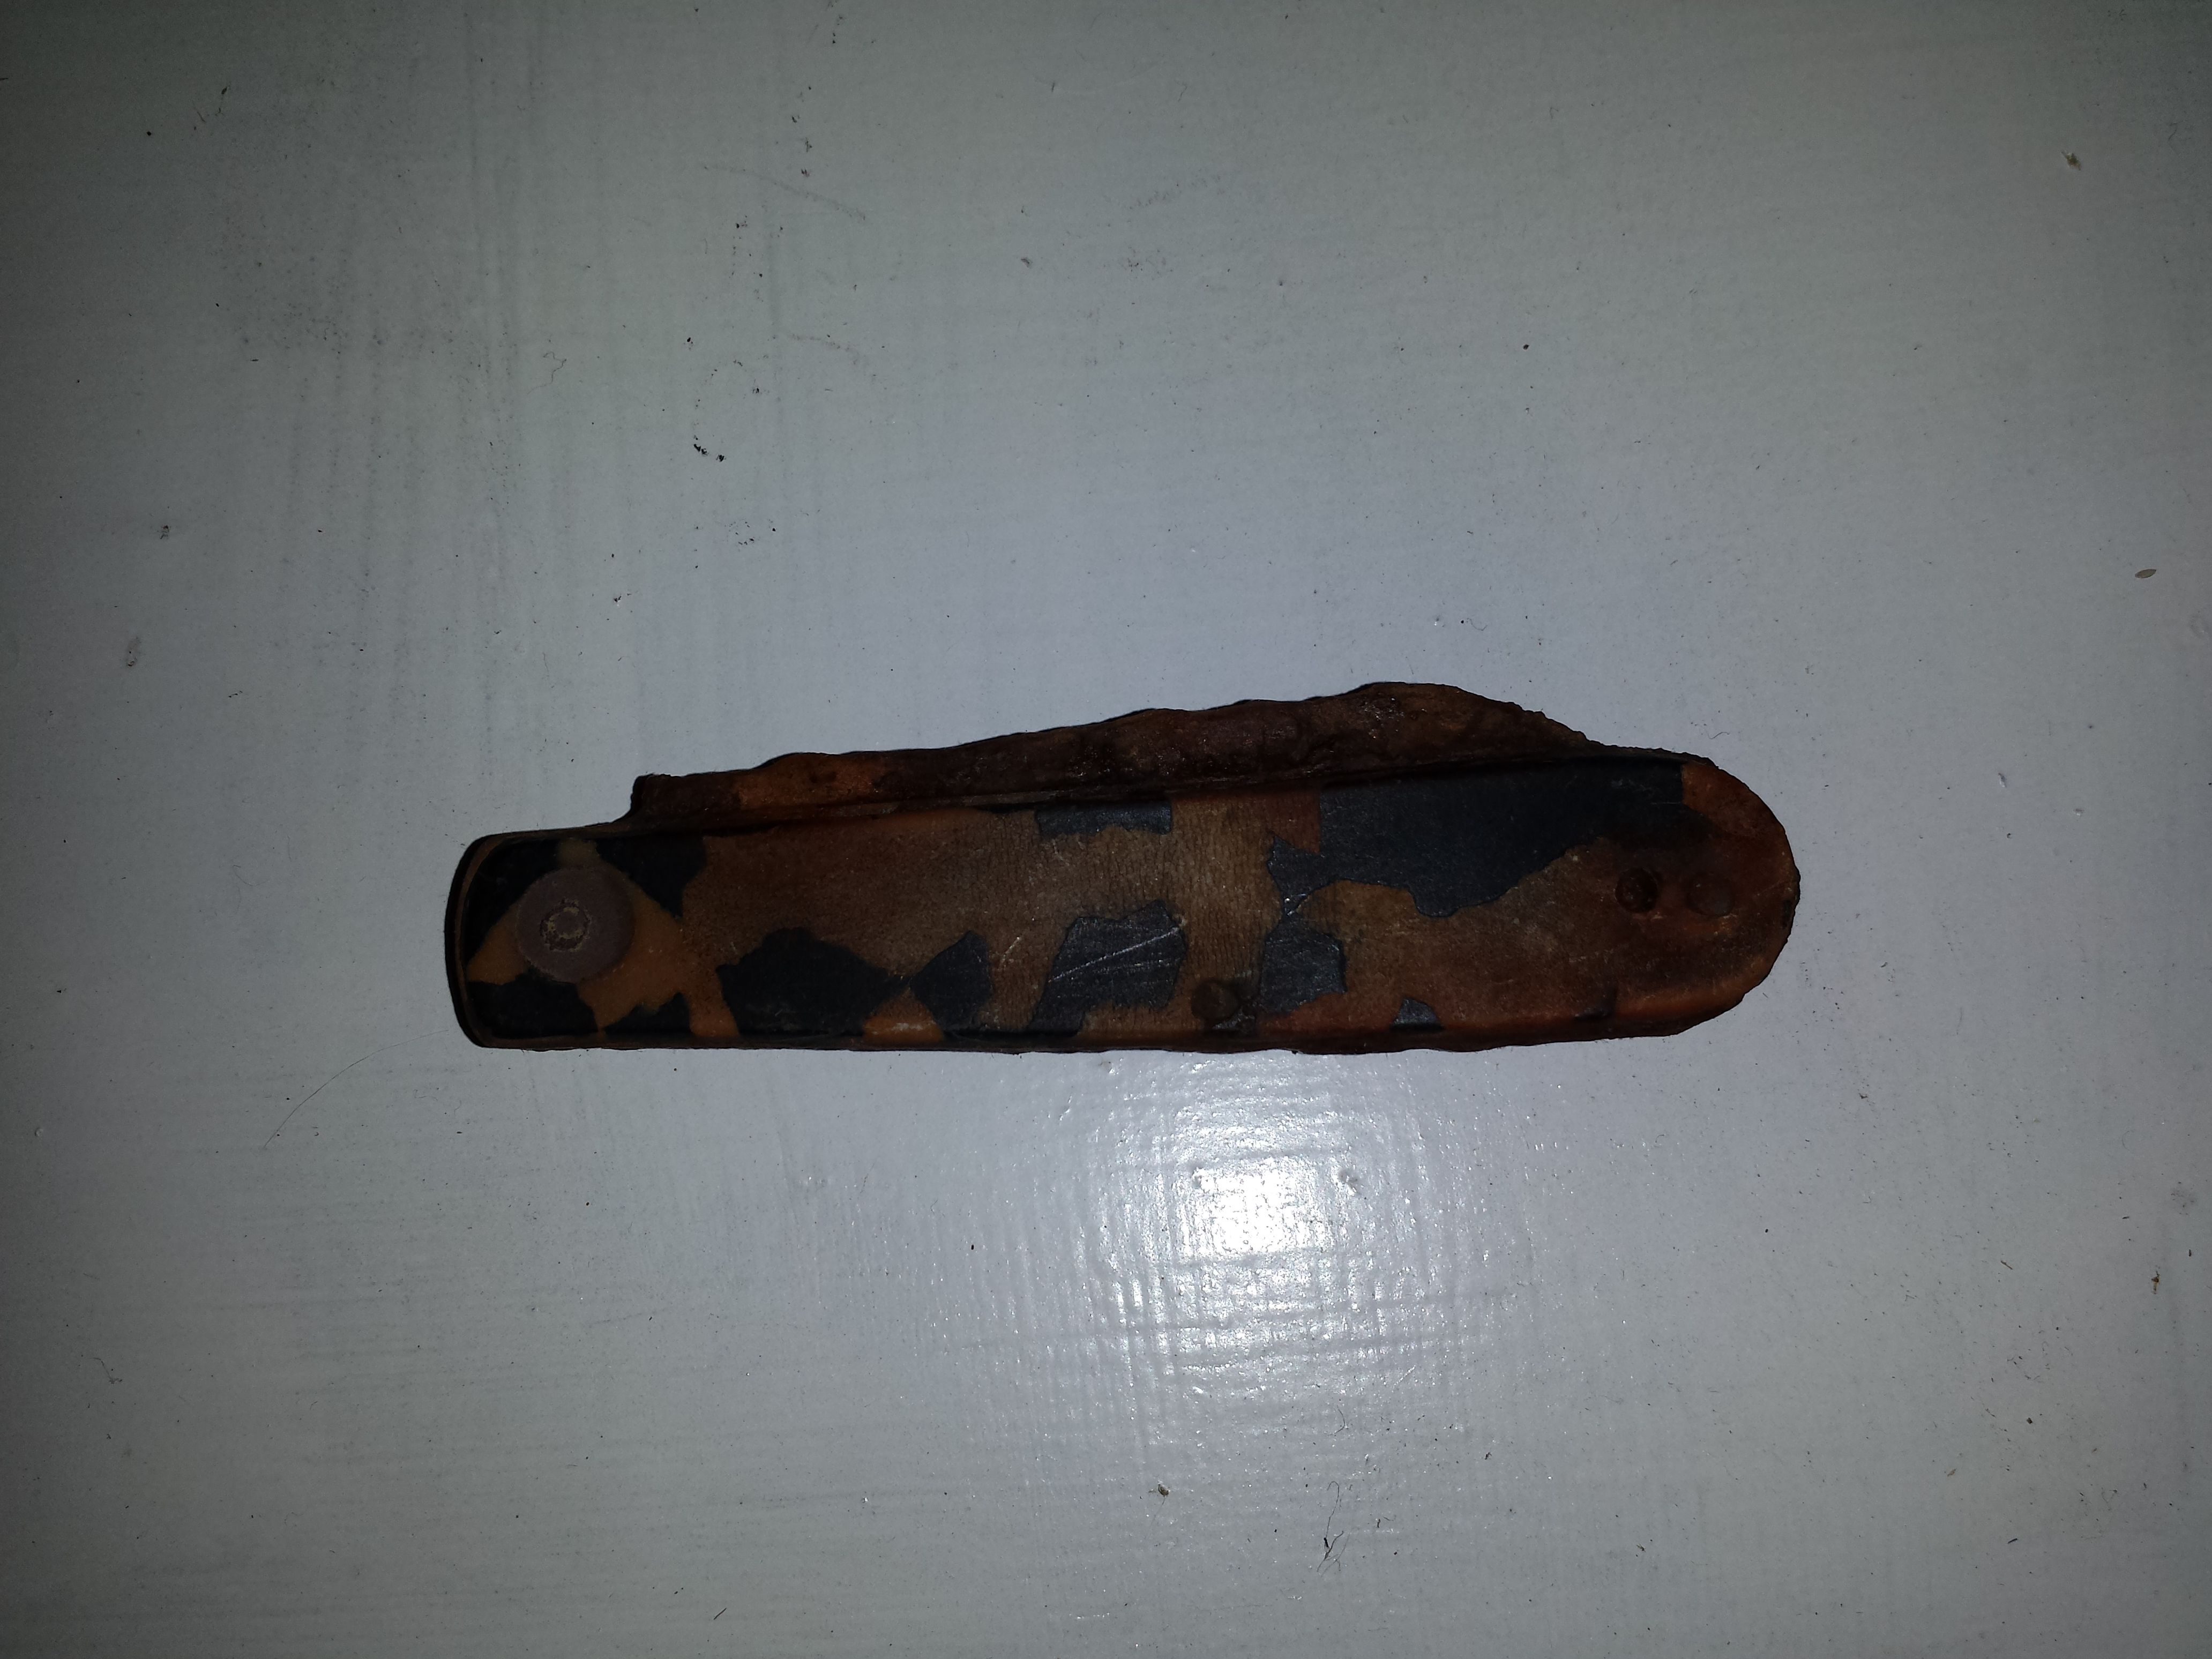 20150705  A pocket knife found around a house built in 1860 on private property in Crystal Springs with the F2.